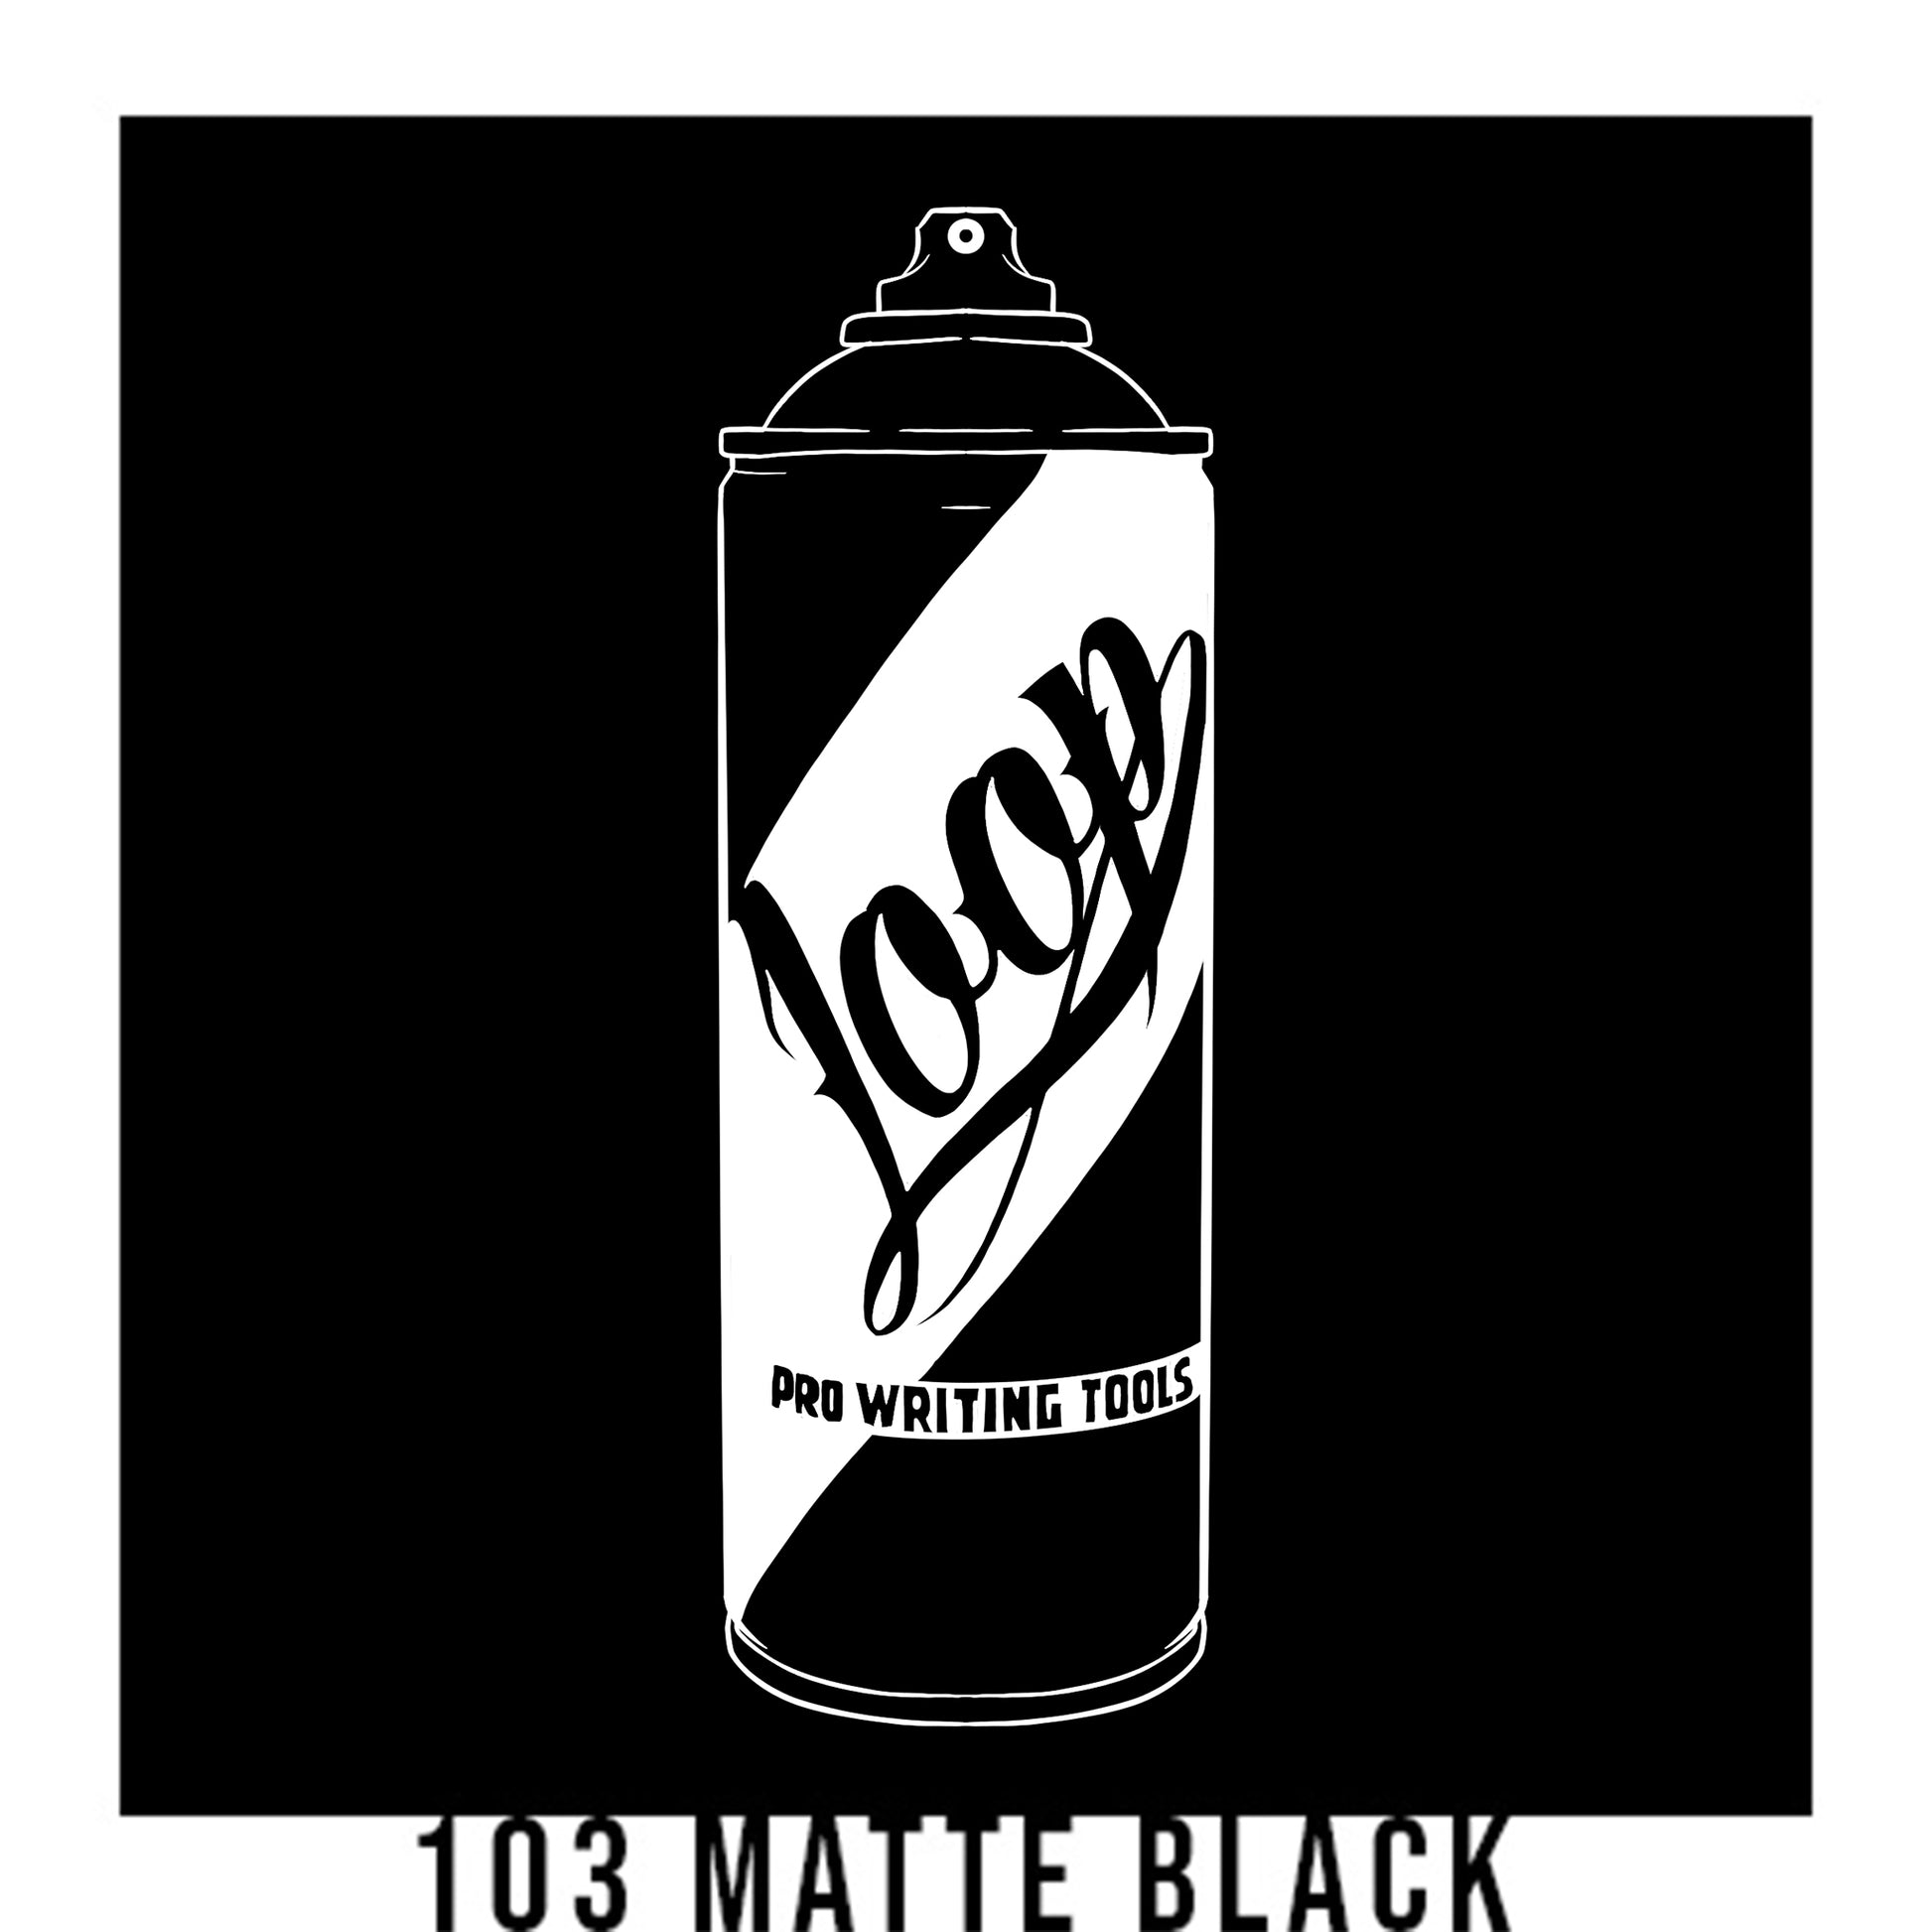 A white outline drawing of a black spray paint can with the word "Loop" written on the face in script. The background is a black color swatch with a white border with the words "103 Matte Black" at the bottom.